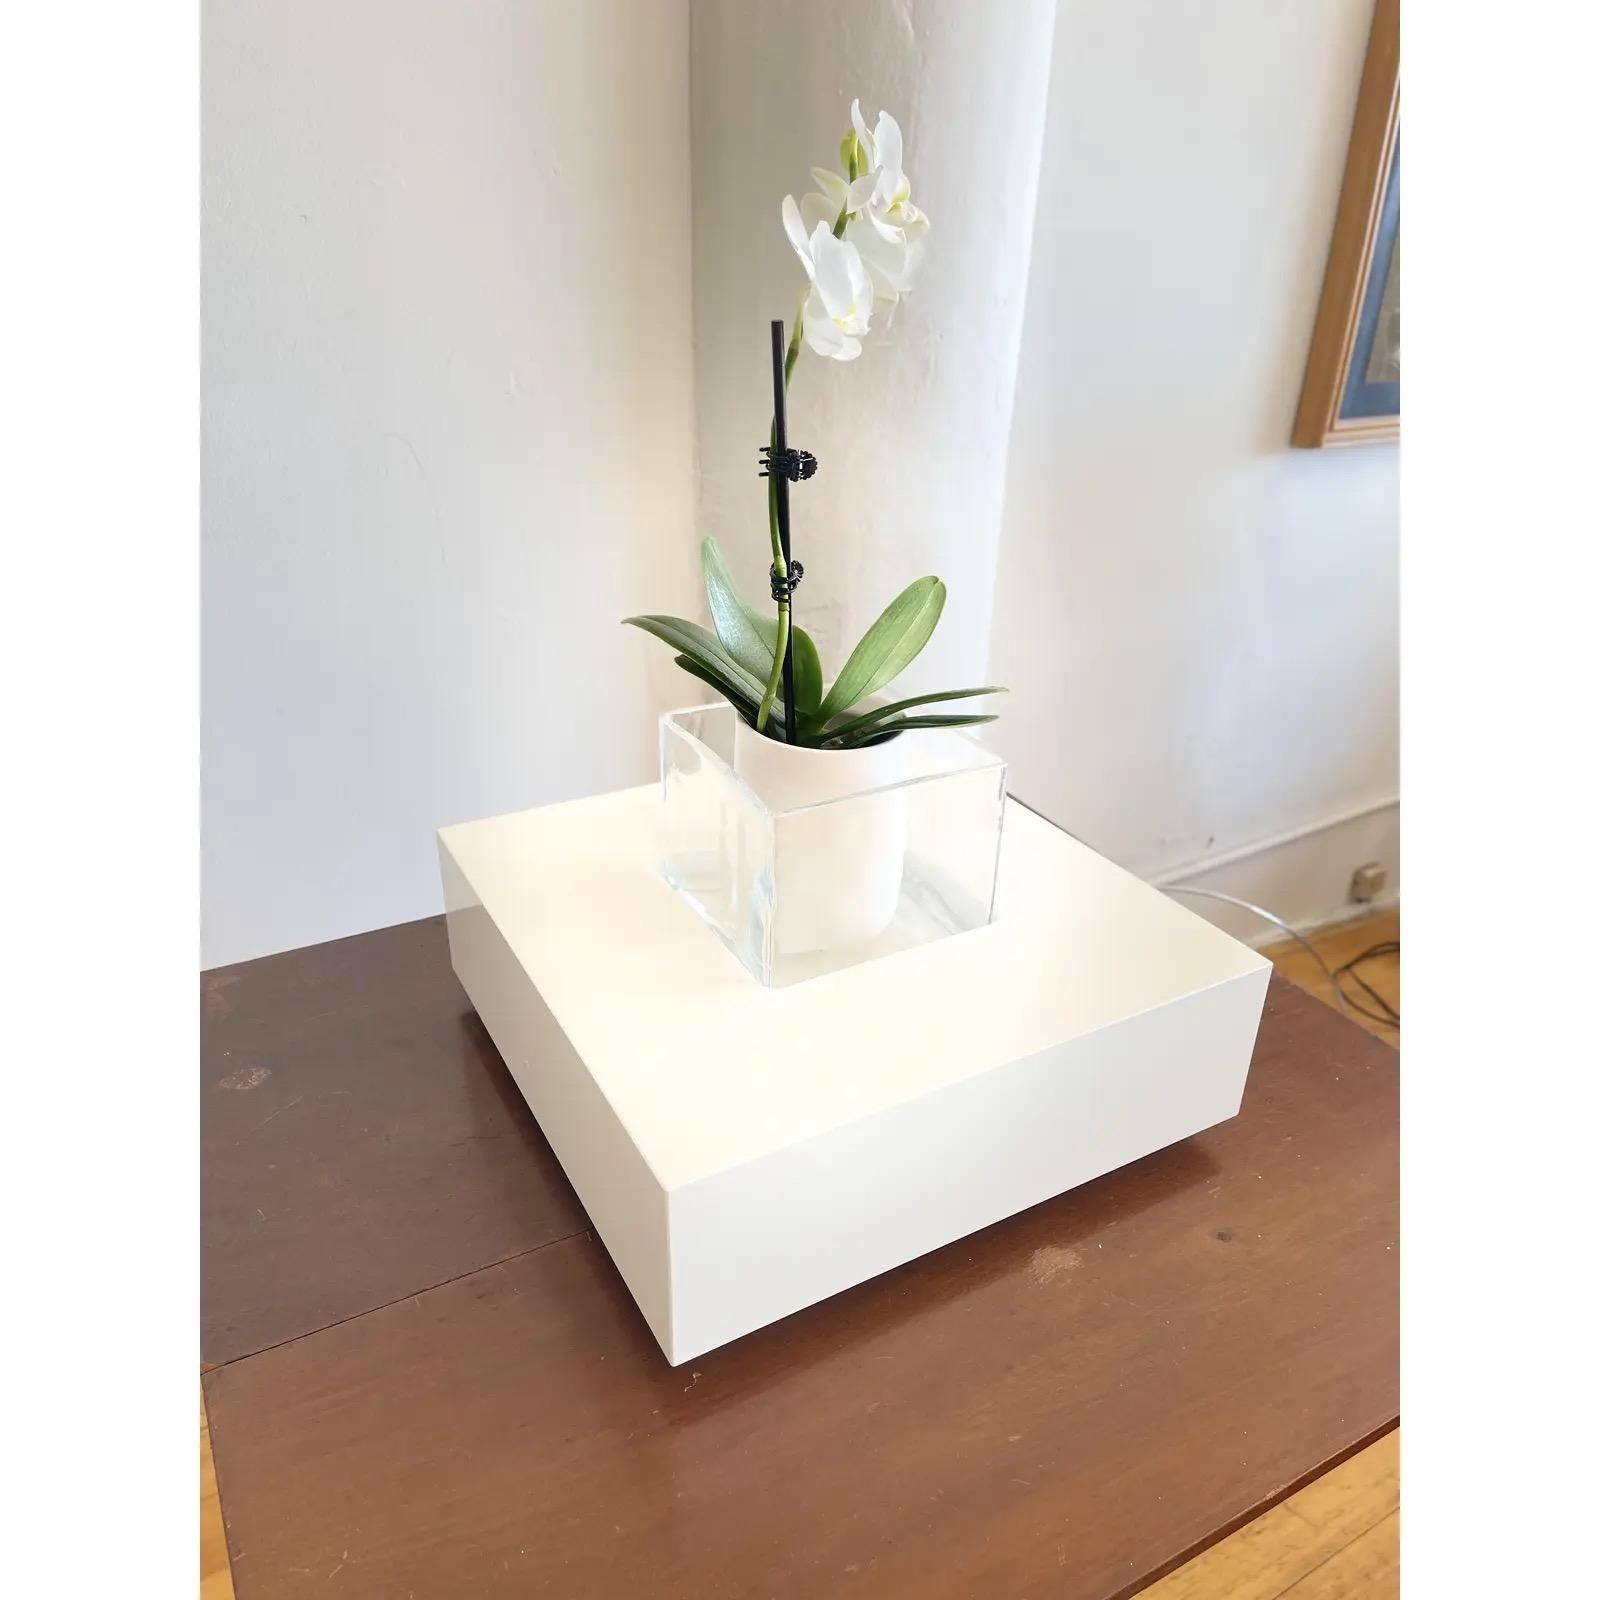 Add a touch of elegance to your dining table with our stunning centerpiece table decor. This Italian-made masterpiece is crafted from a solid glossy white lacquered wood block, ensuring durability and a sleek appearance. The centerpiece features a